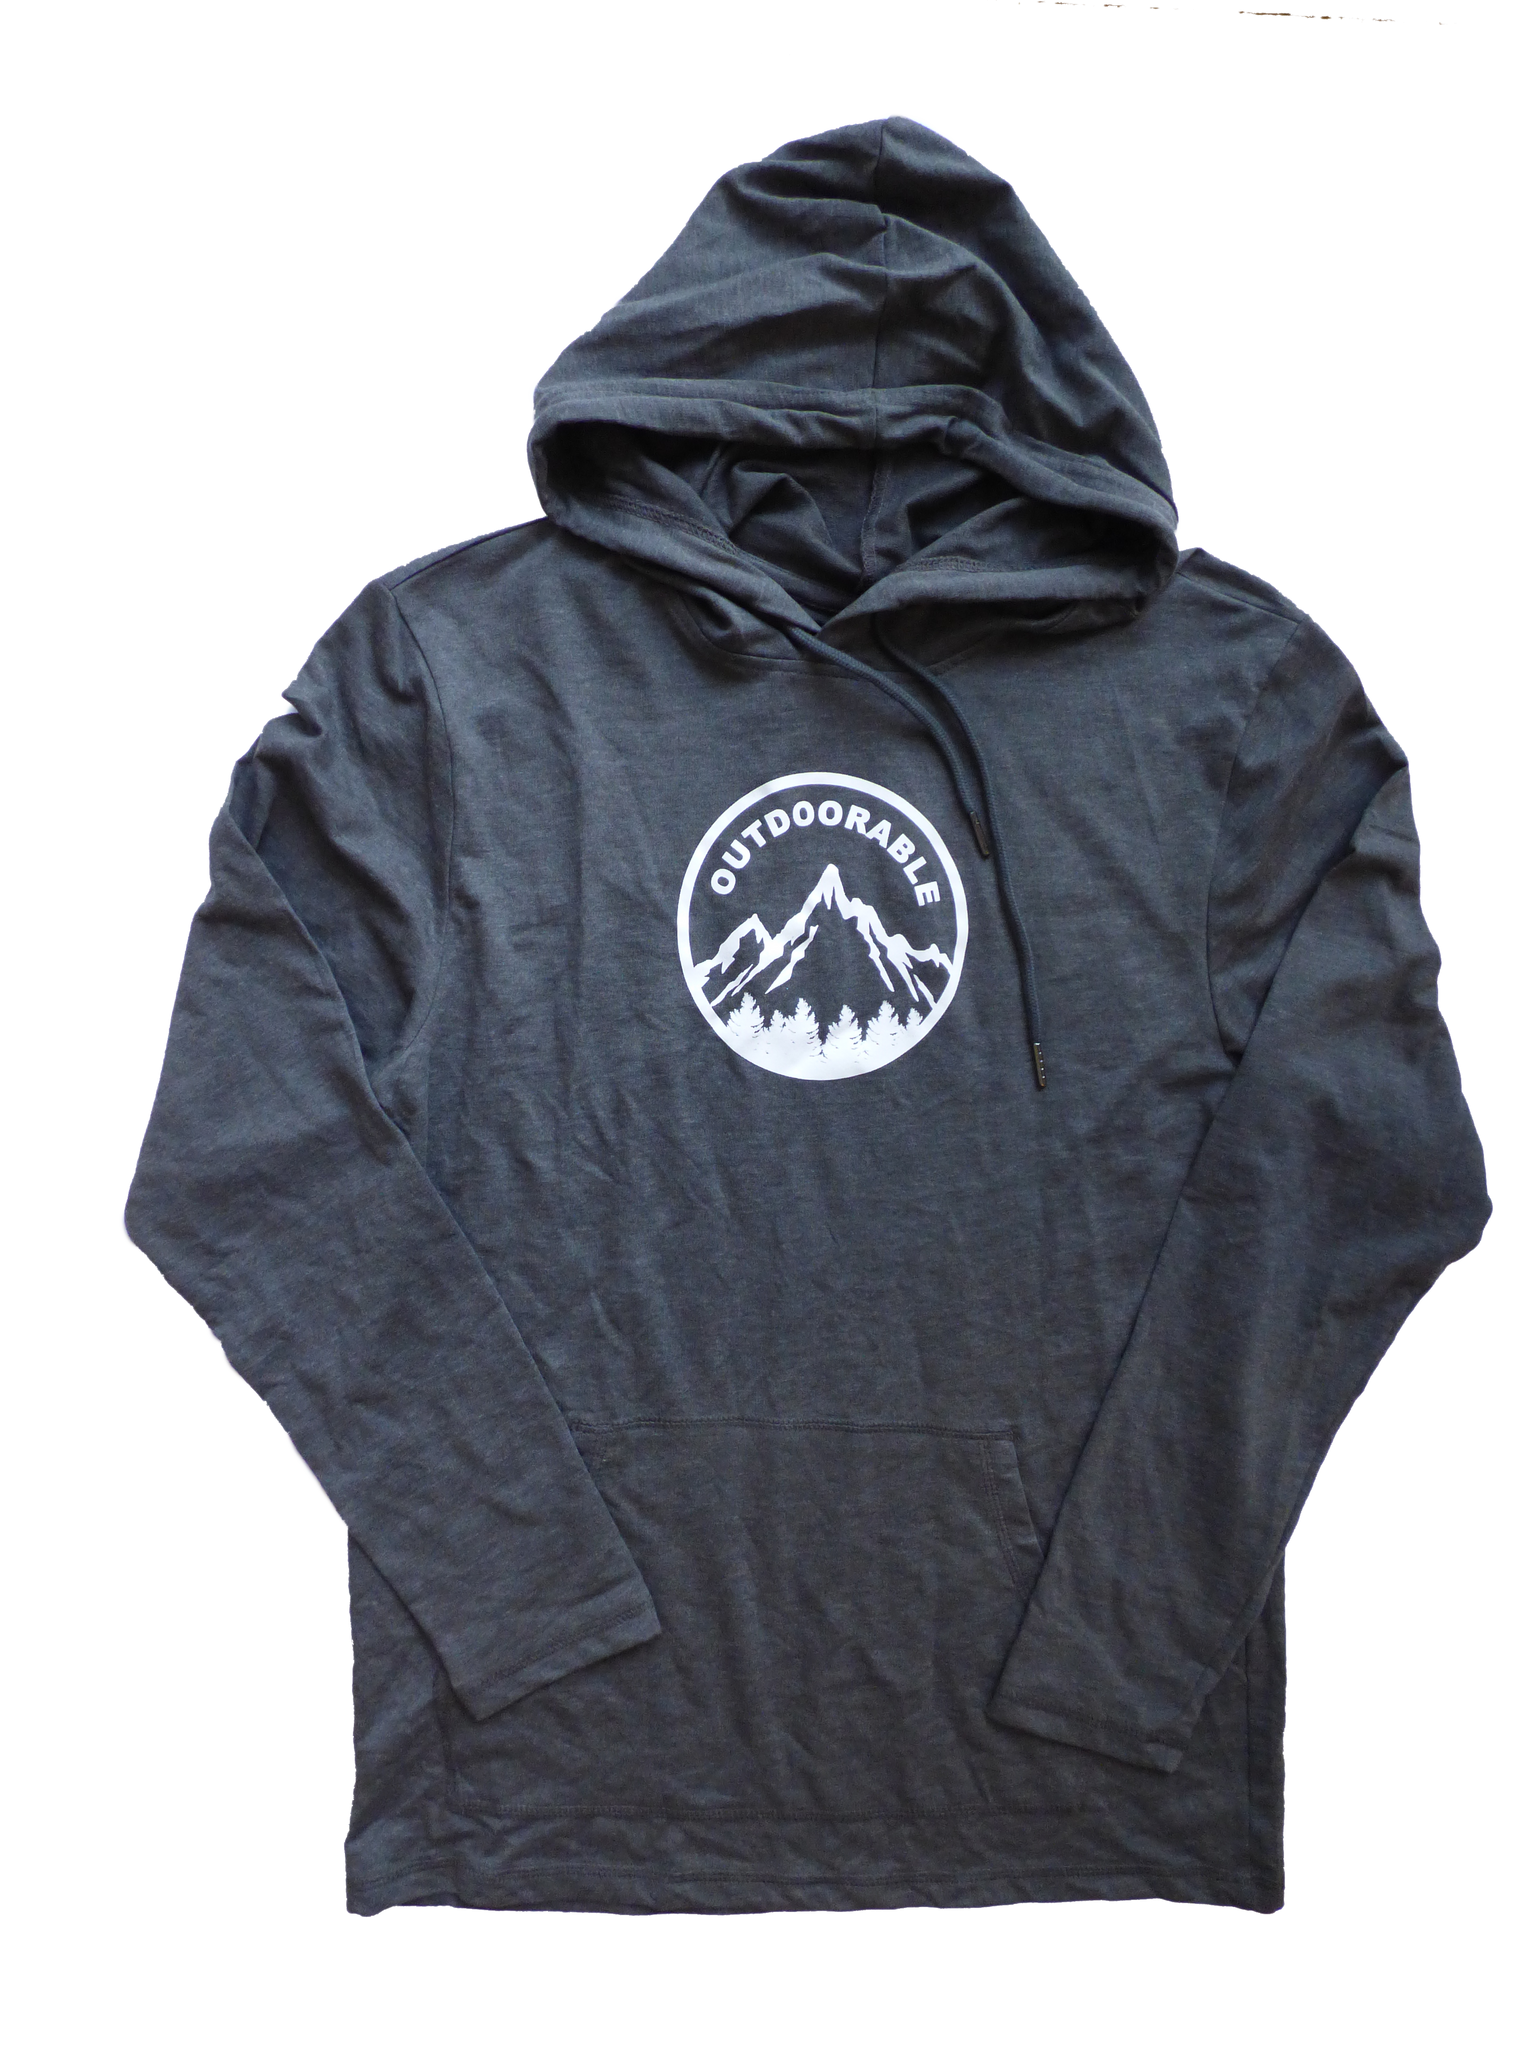 Outdoorable Charcoal Unisex Light Weight Hoodie